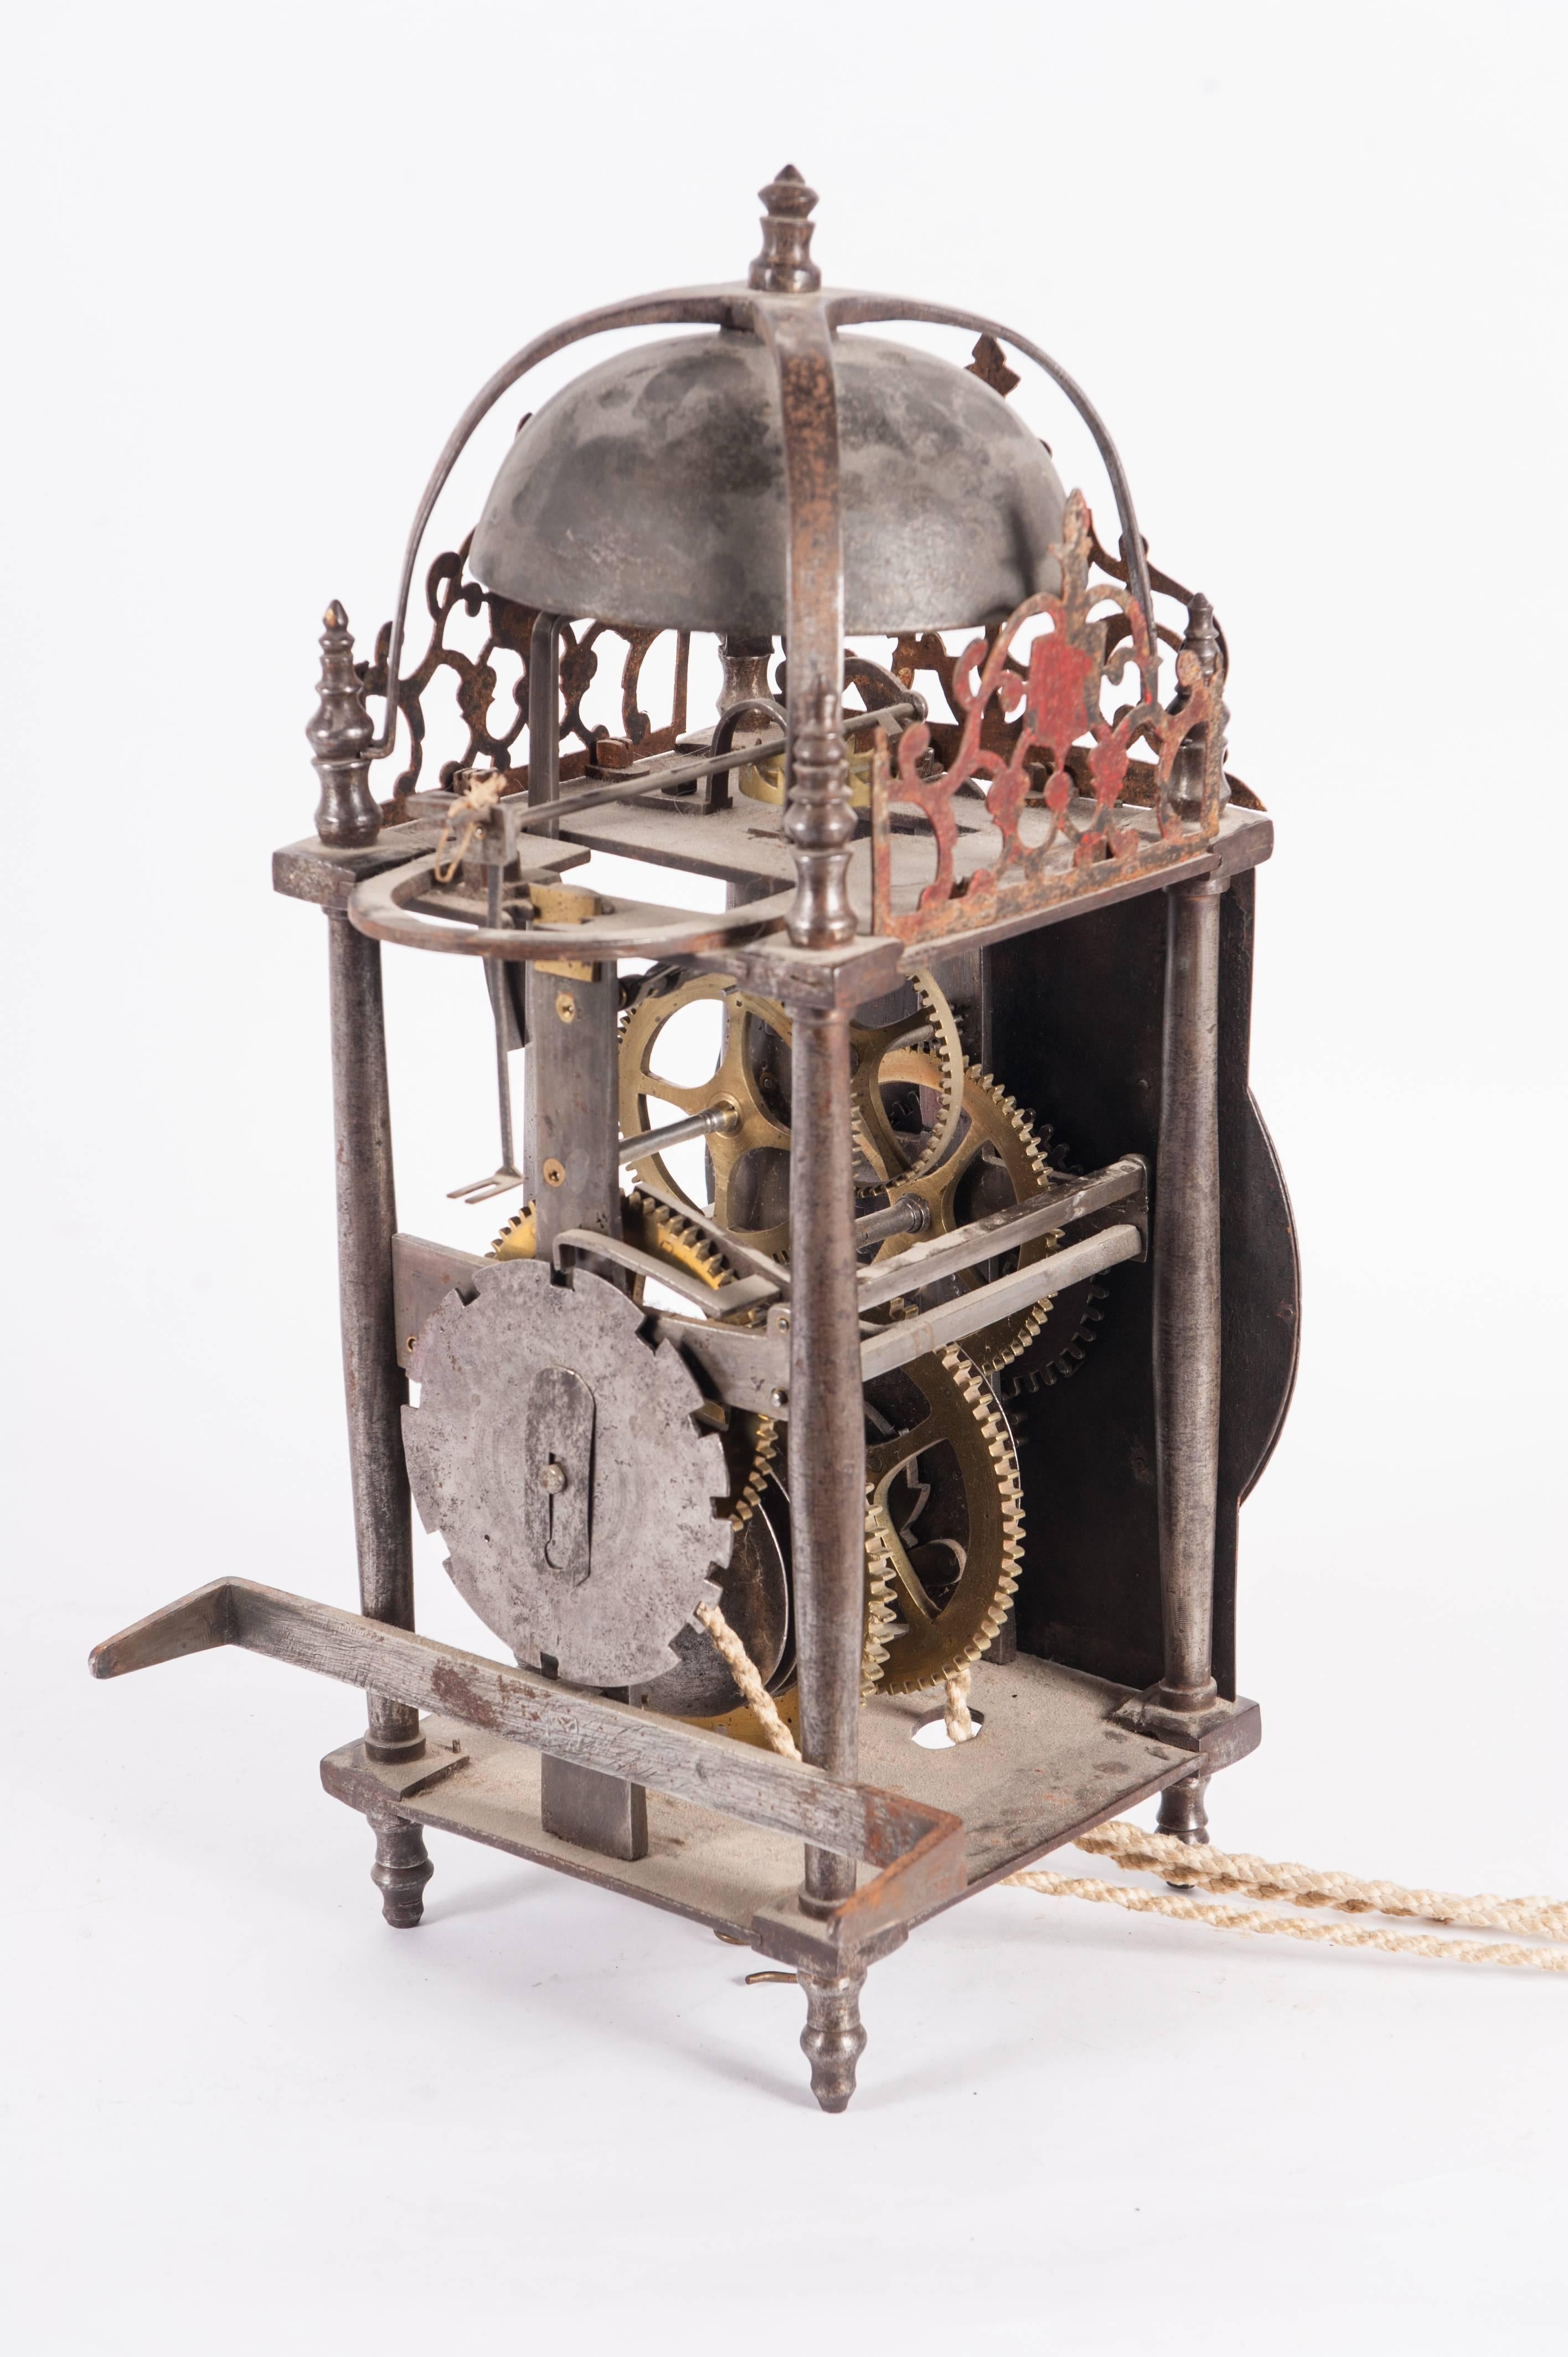 A highly important and impressive french country lantern clock. Unusual big size. The clock was made about 1720, also has going and striking train with verge escapement, very nice wrought iron craftsmanship. Clock topped with a giant bell mounted on